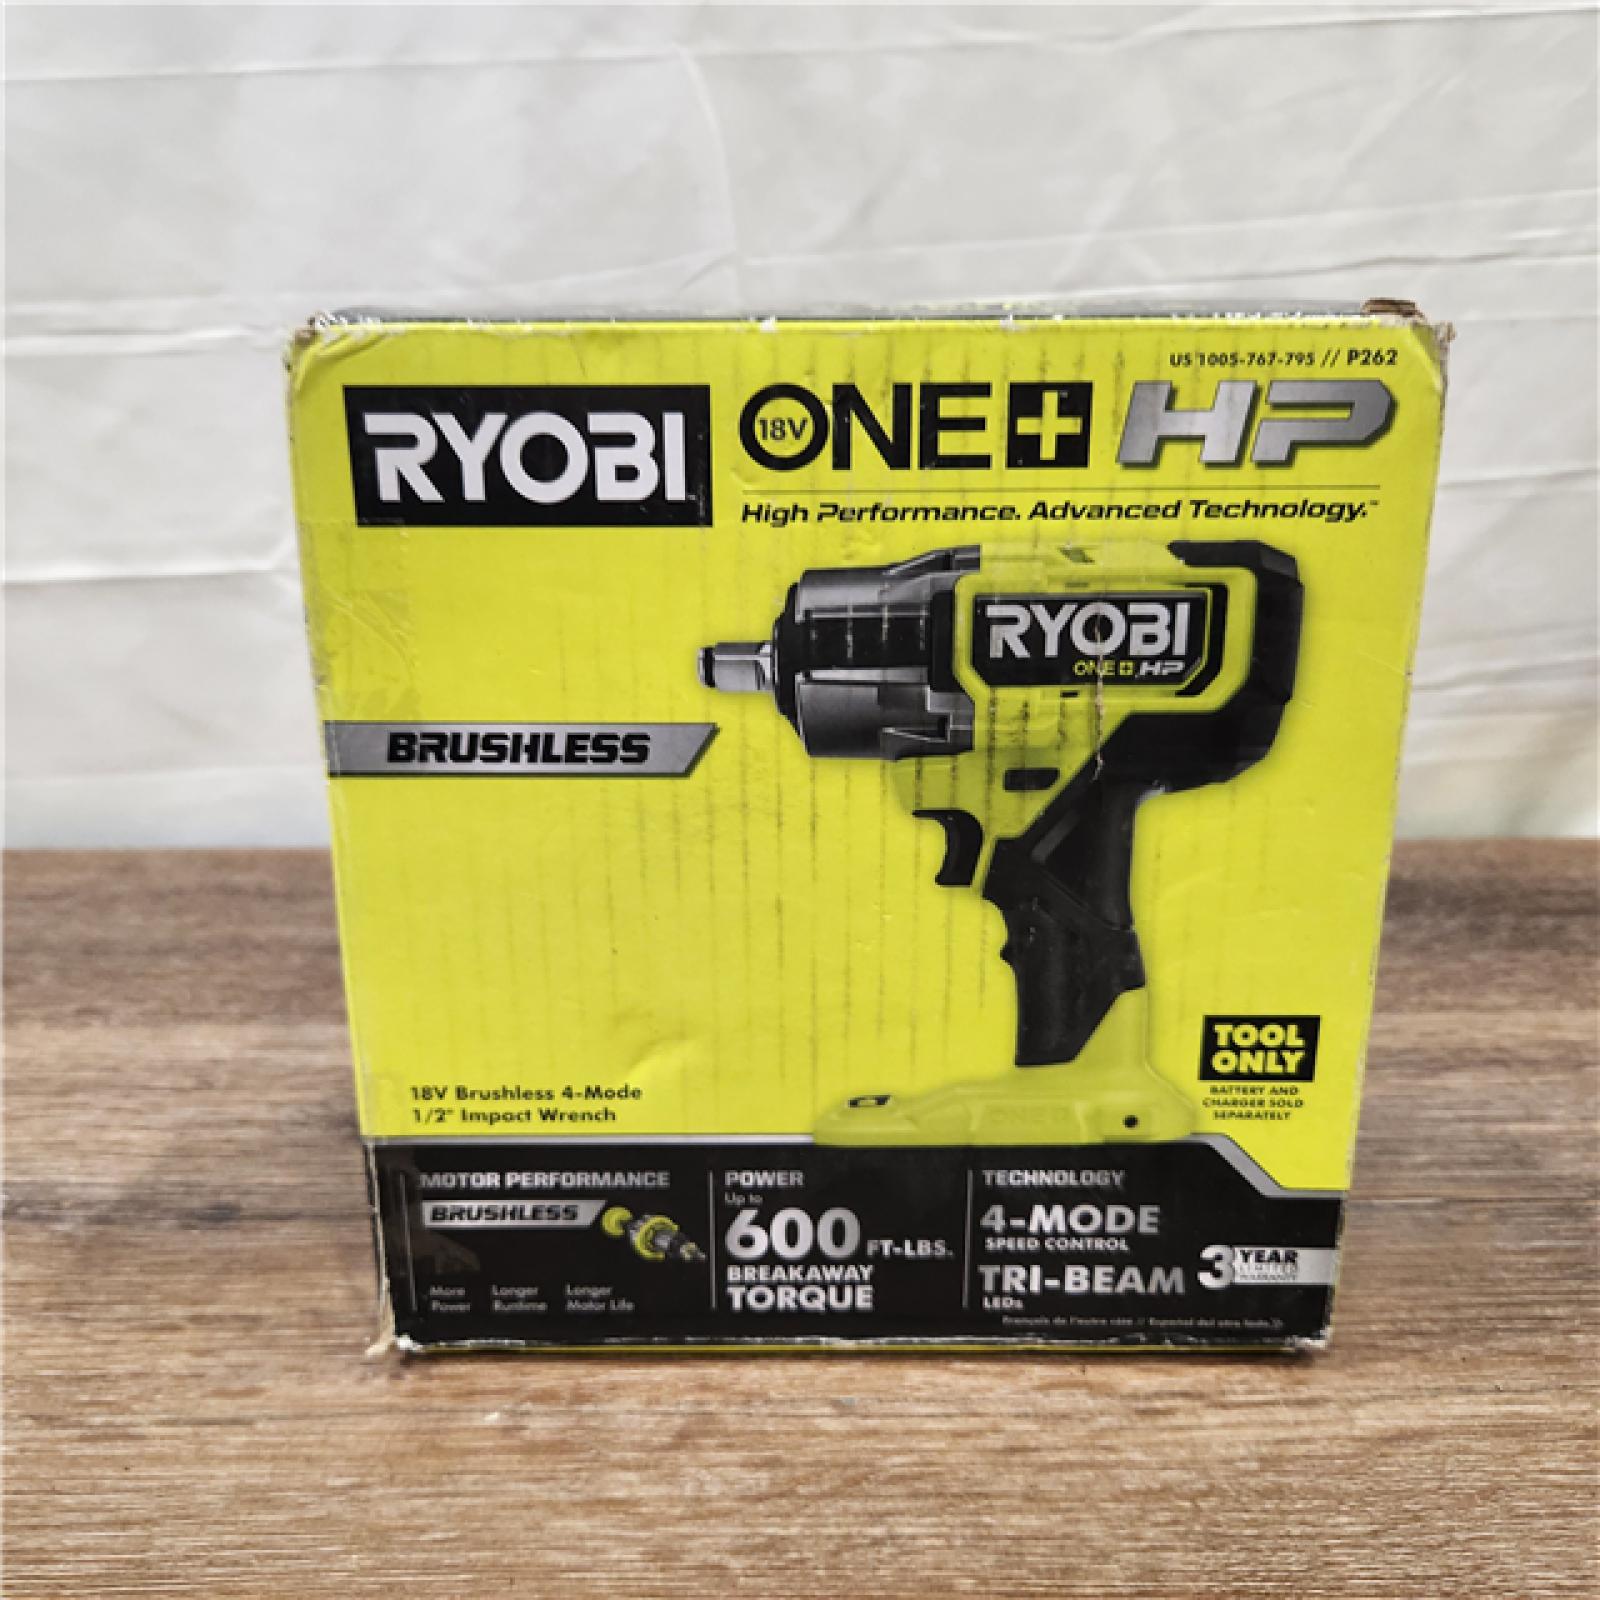 AS-IS RYOBI ONE+ HP 18V Brushless Cordless 4-Mode 1/2 in. Impact Wrench (Tool Only)